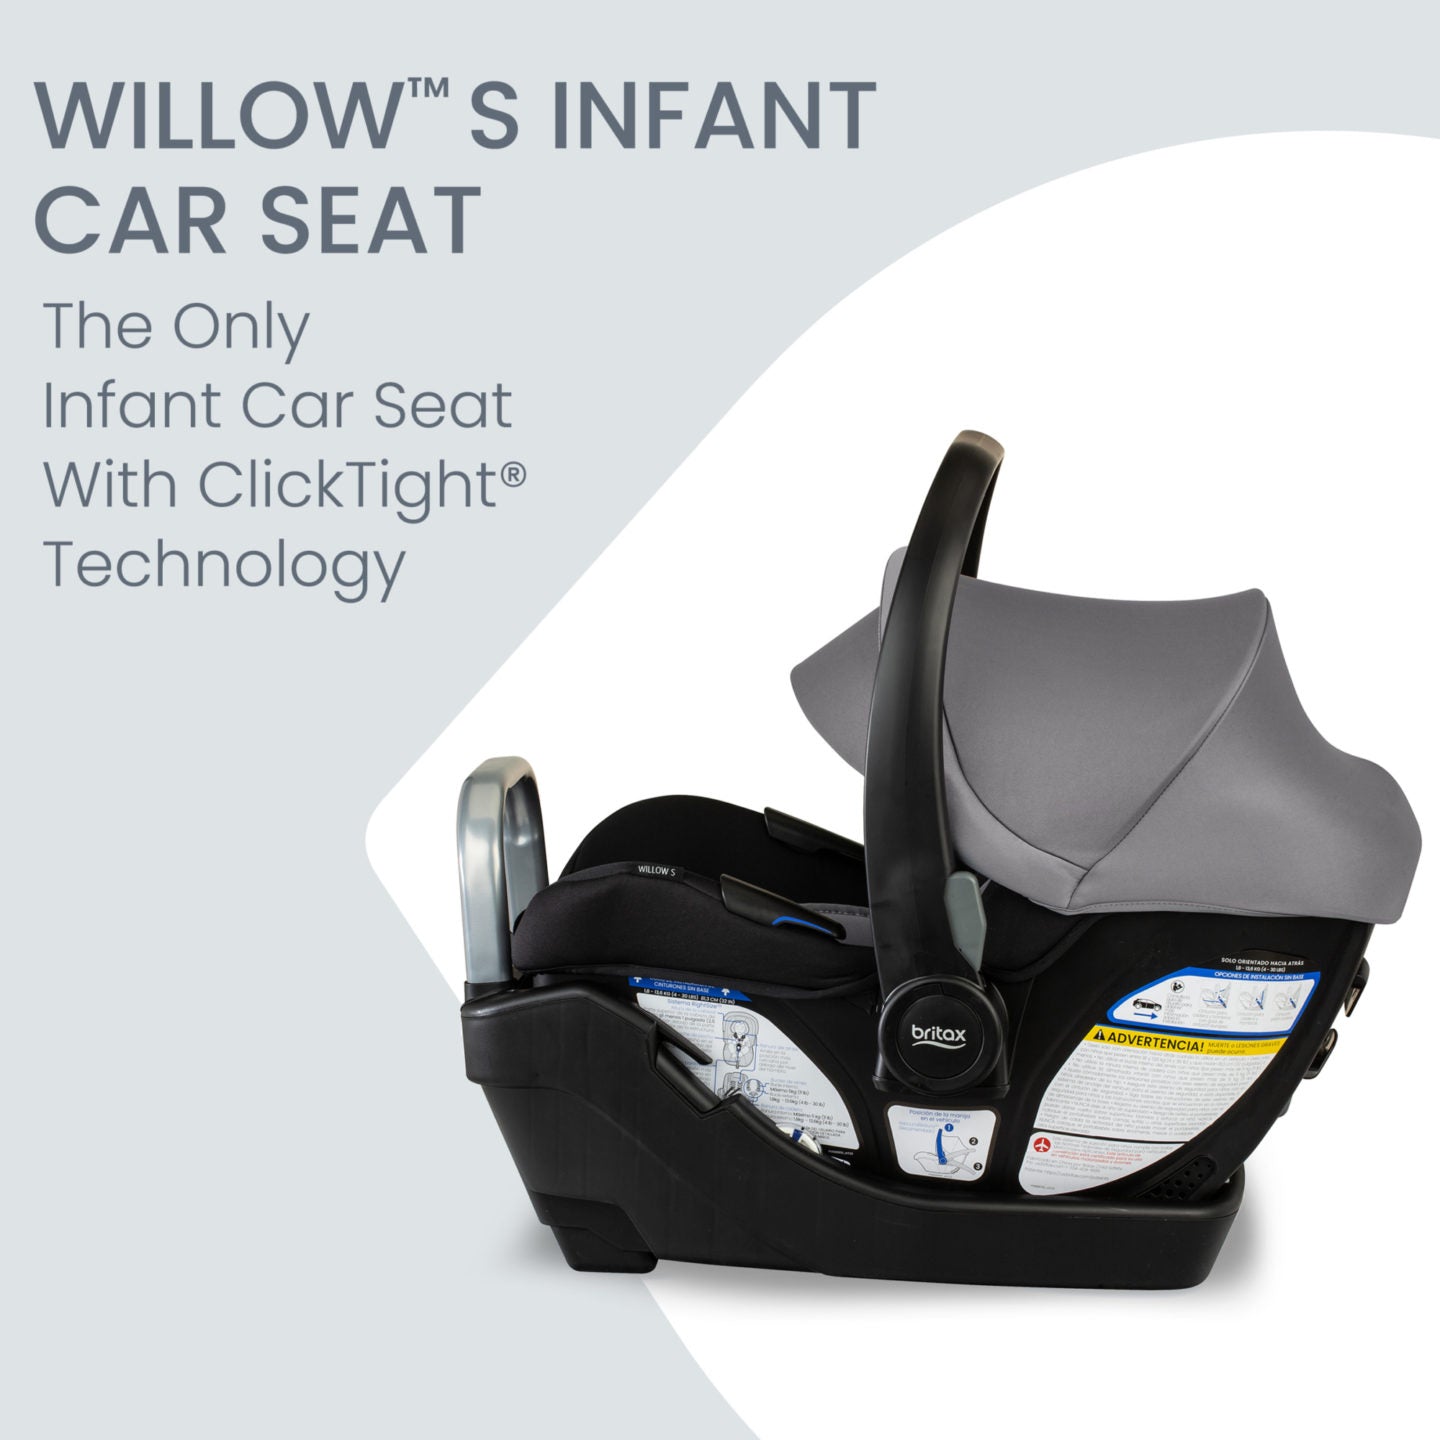 Britax Willow S Infant Car Seat Features - Graphite Onyx